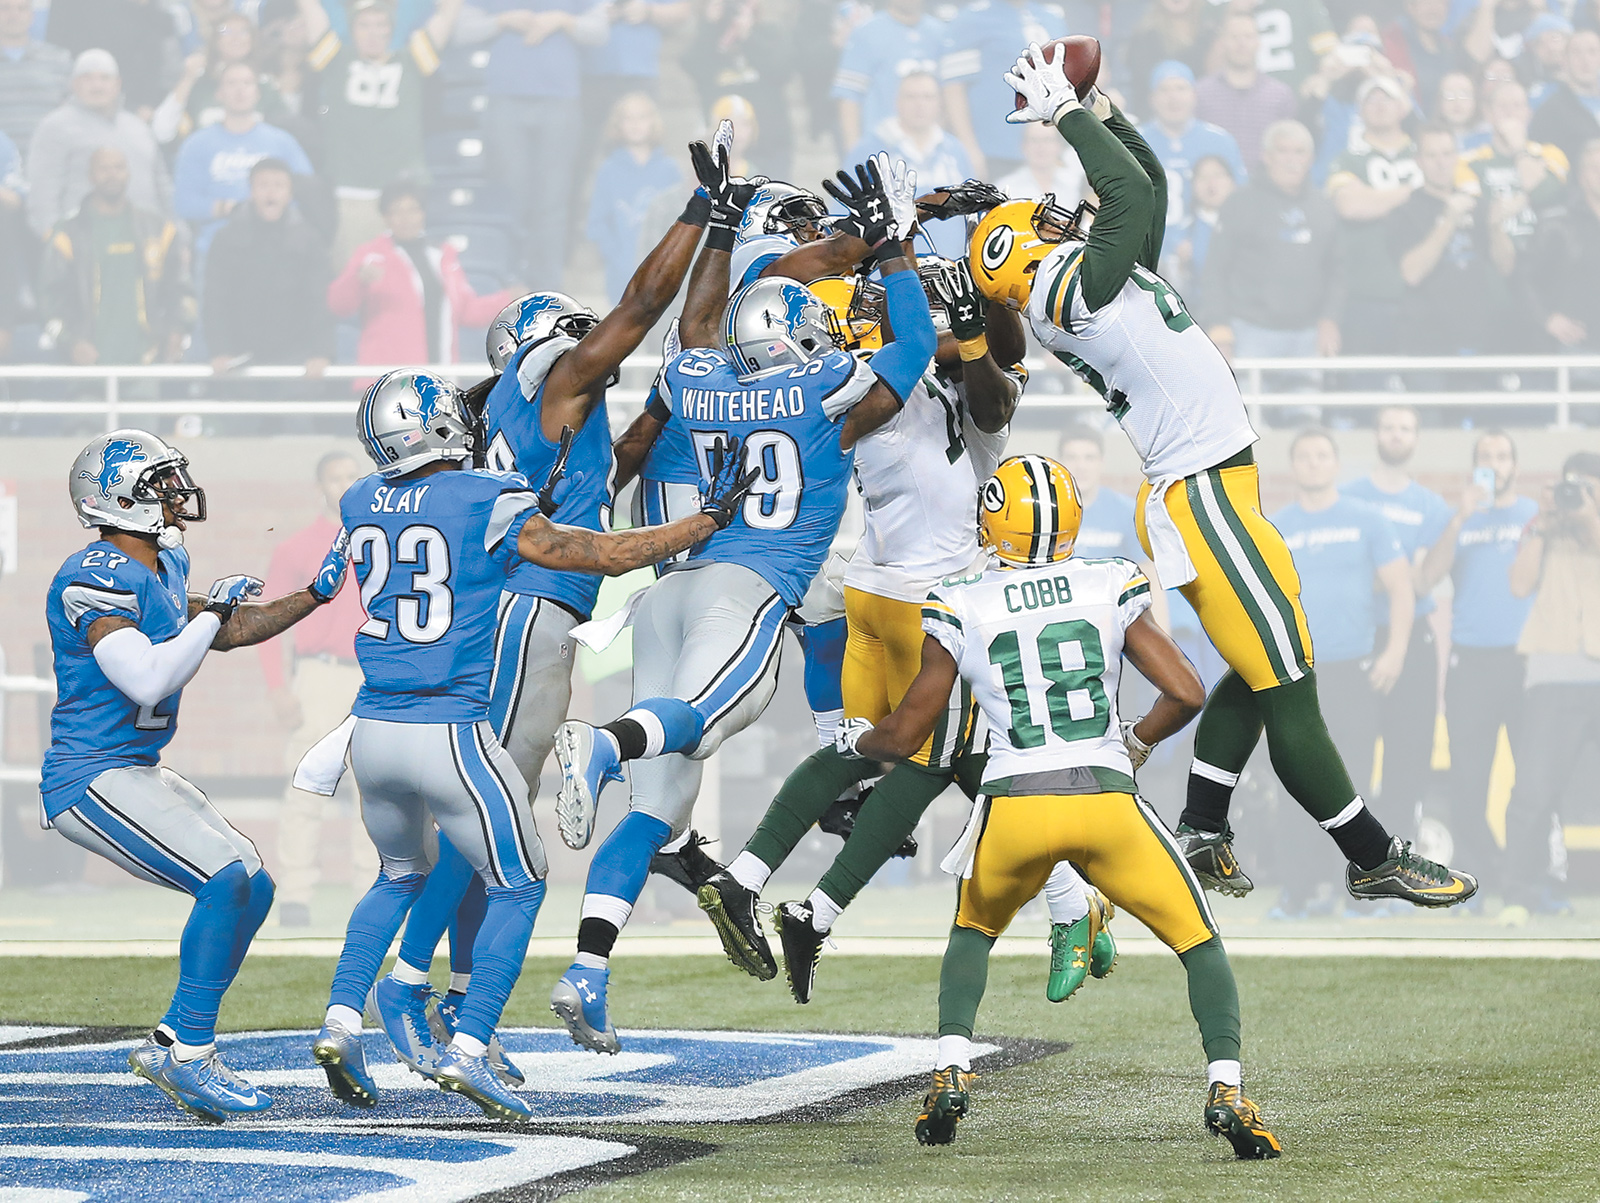 Richard Rodgers of the Green Bay Packers catching Aaron Rodgers’s seventy-yard pass to win the game against the Detroit Lions, December 3, 2015